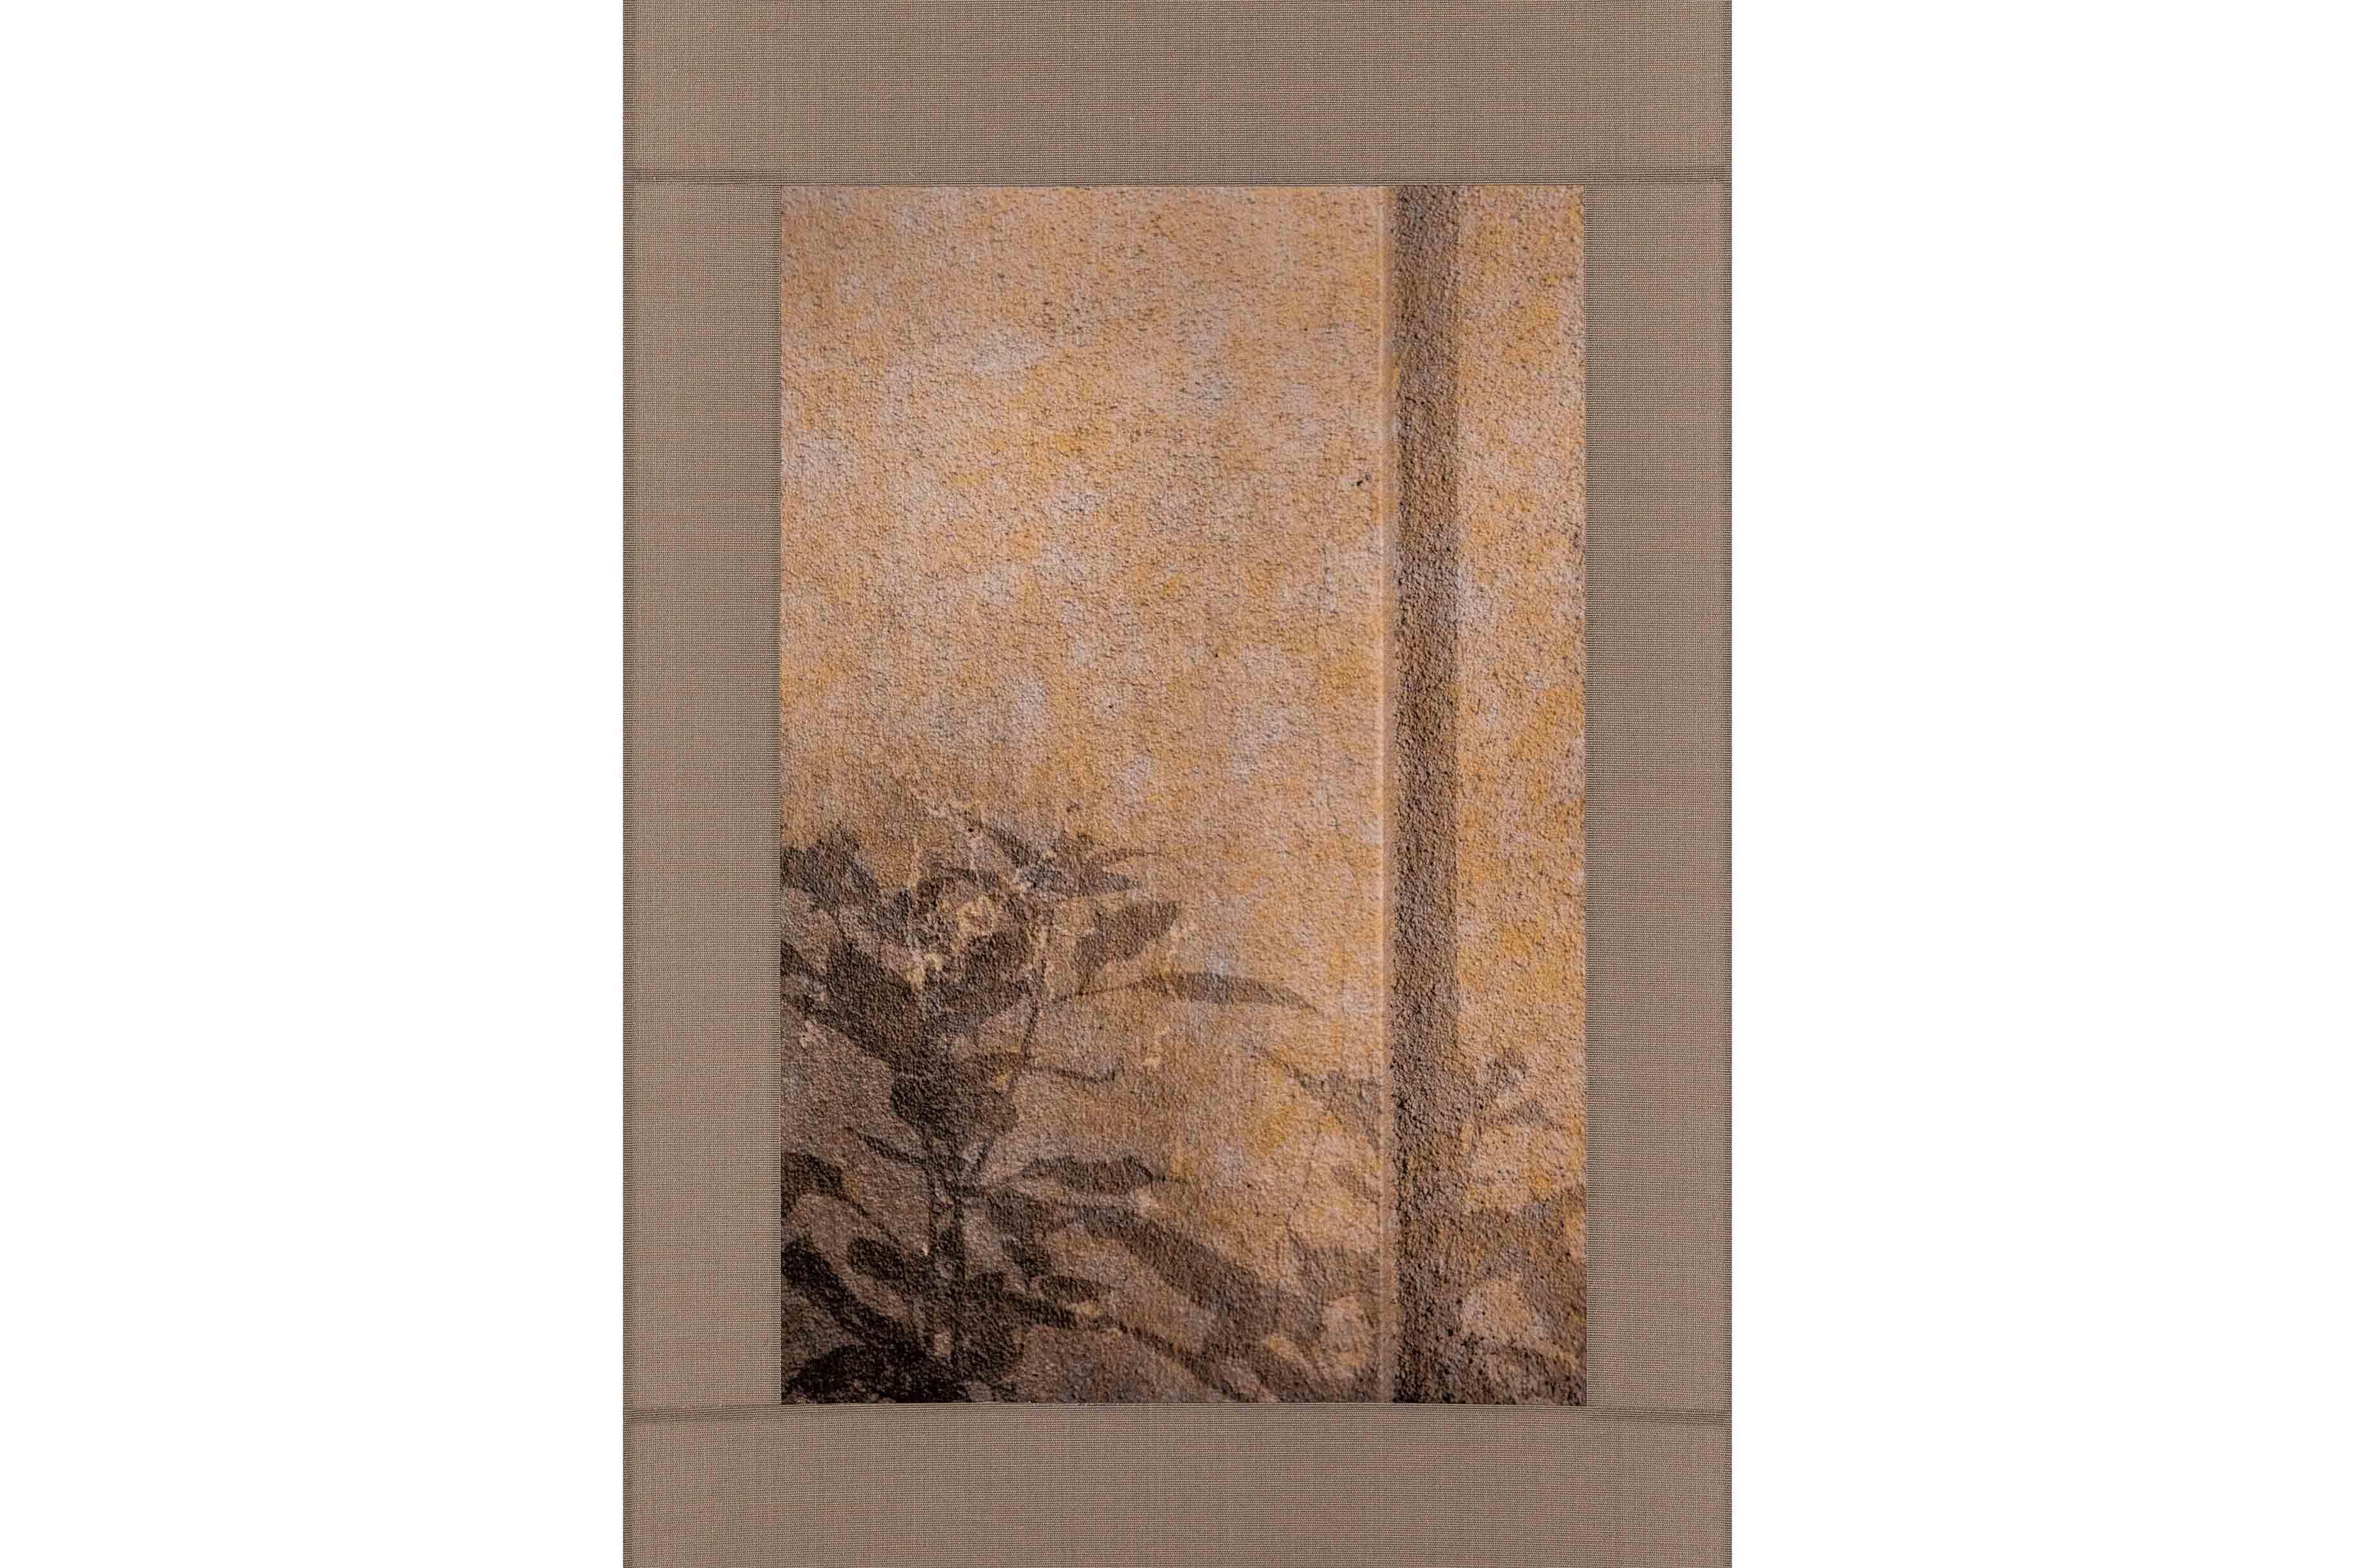 Inkjet print of digital photograph on Kakejikuya kozo washi

Kojun is an self-taught multimédia American artist born in 1977 based in Tokyo, Japan since 1999. Kojun project started in 2010 explores the experiences of beauty glimpsed  in everyday